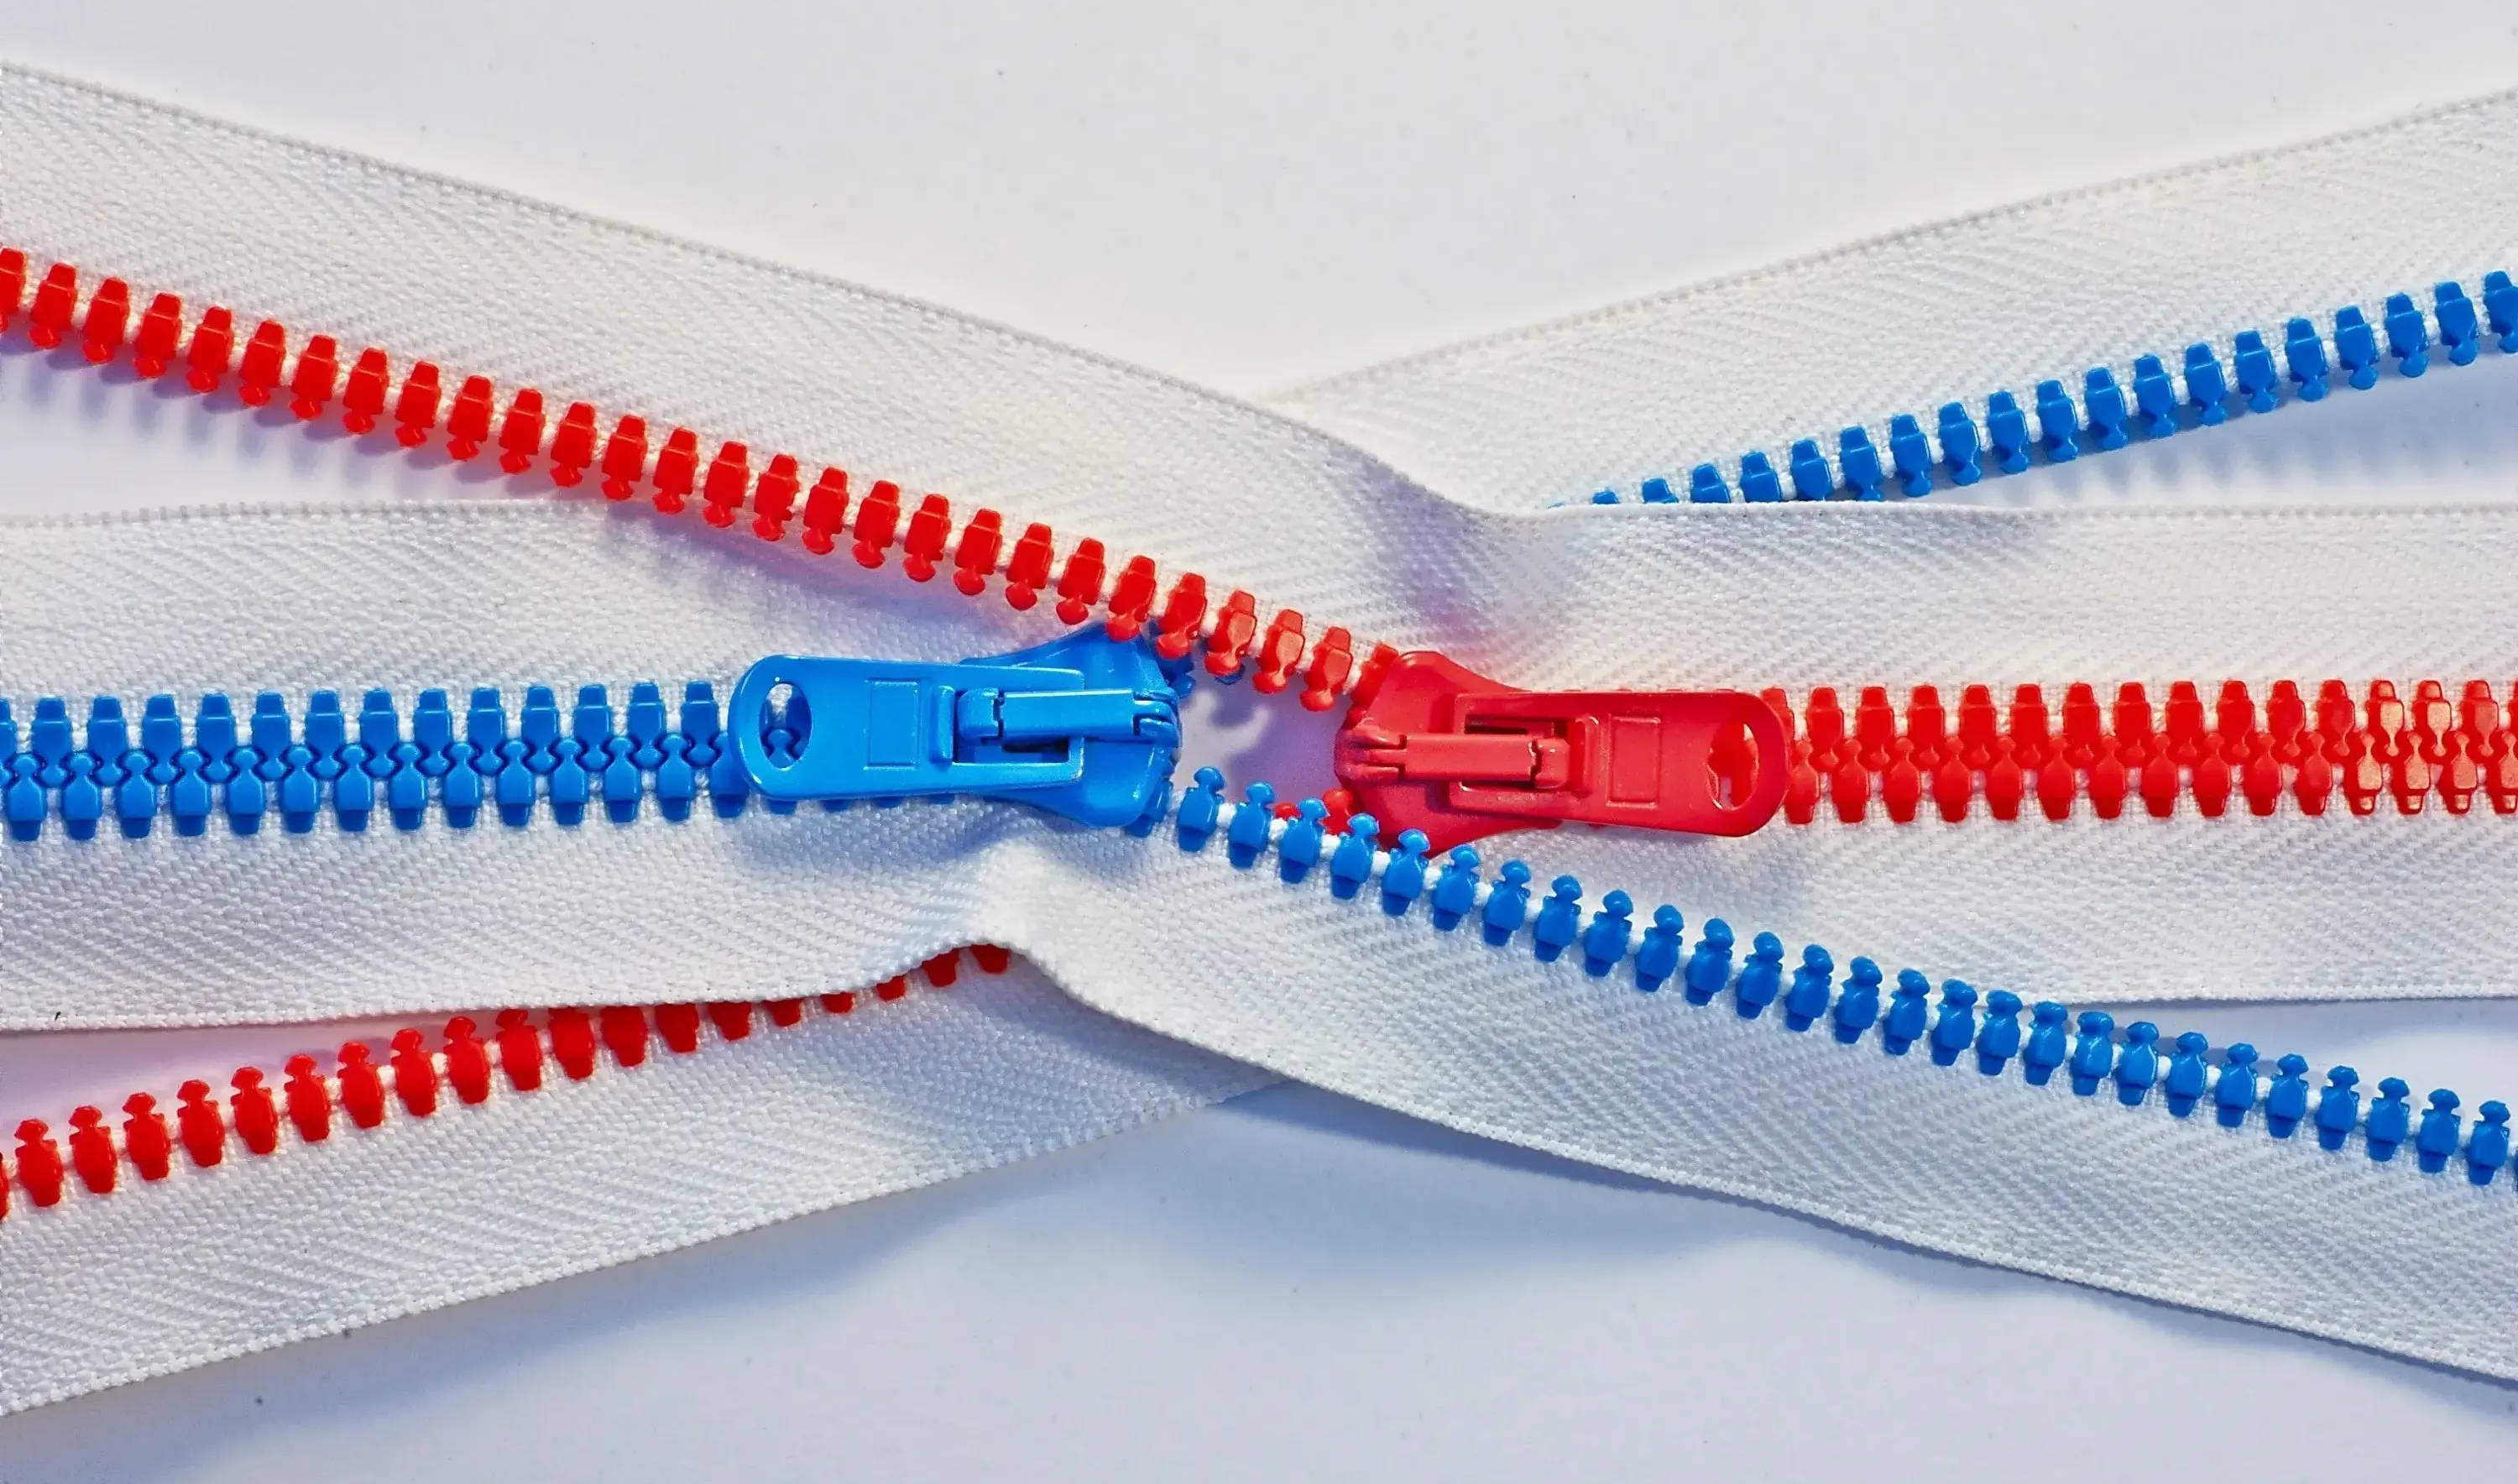 Two zippers zip into each other, one red and one blue. Image by Tomas Sobek. 